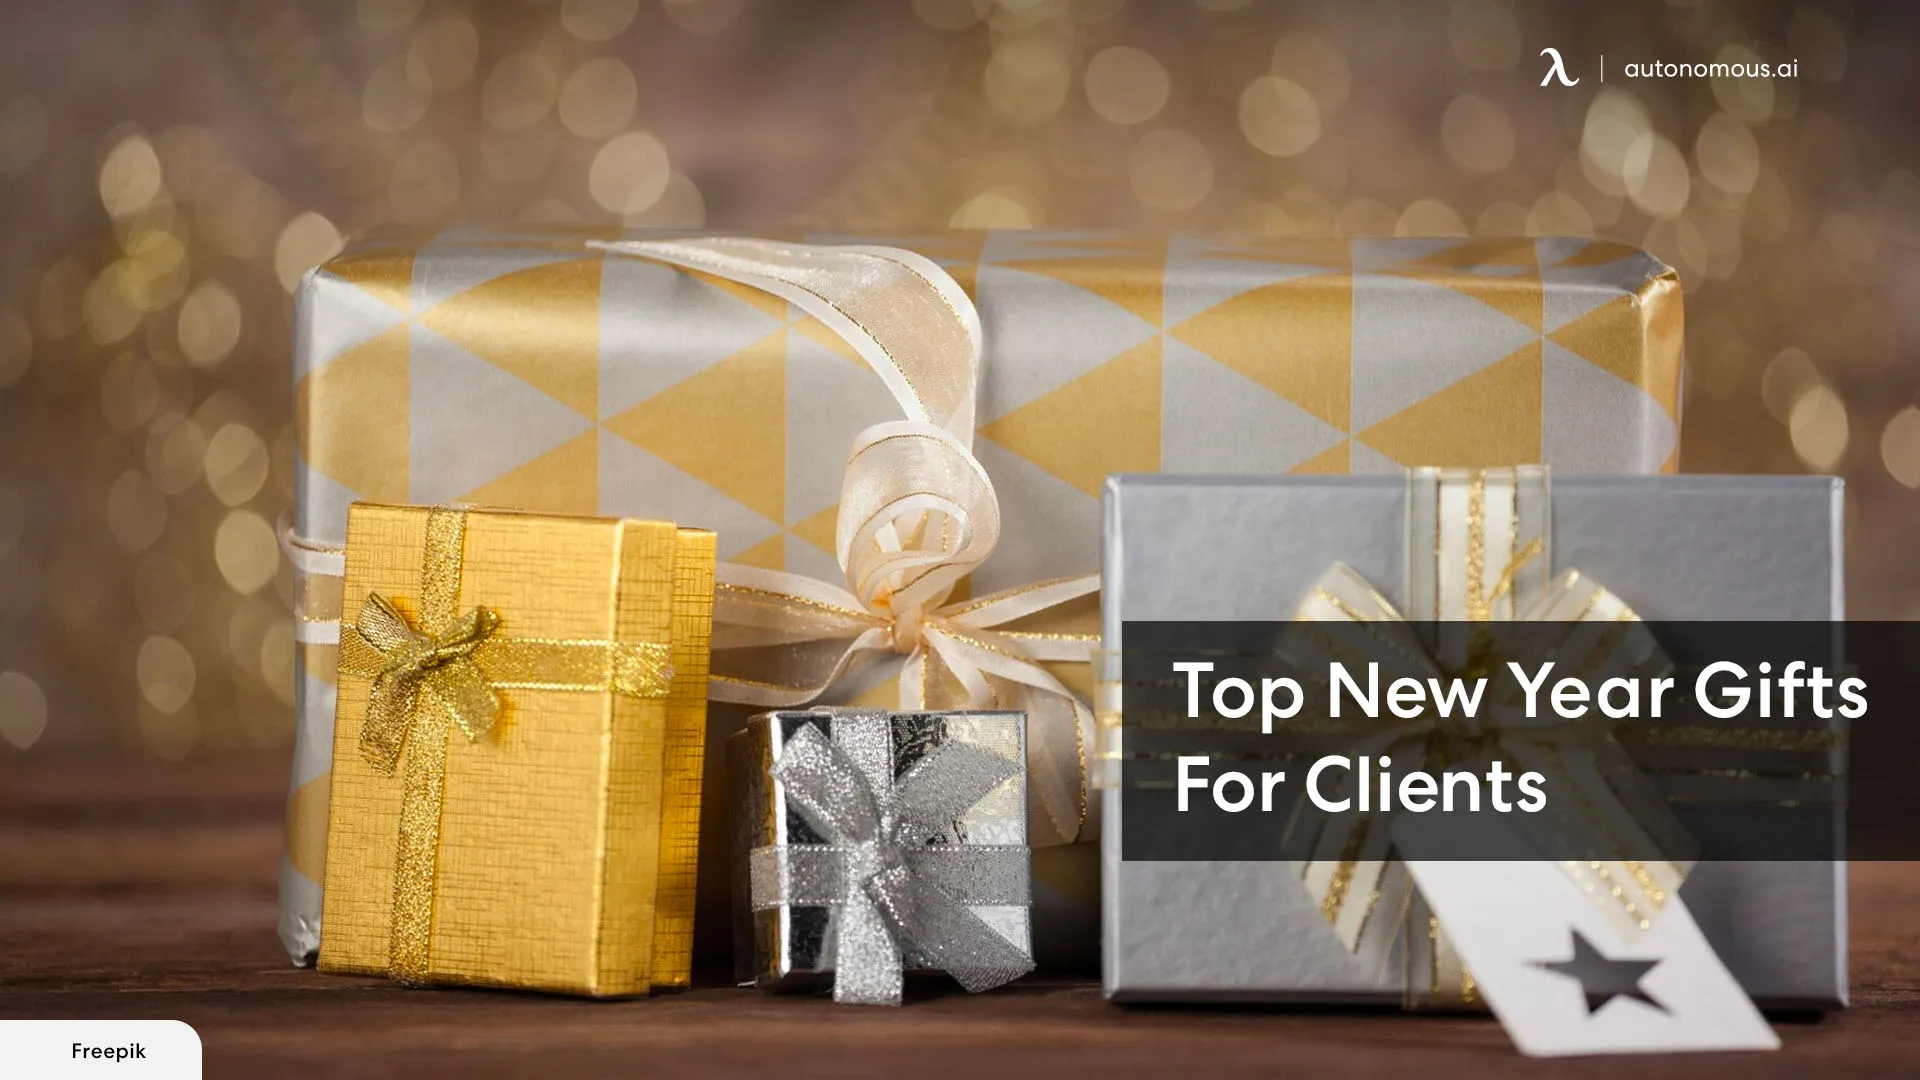 Client Connections: Impress with These New Year Gifts for Your Clients